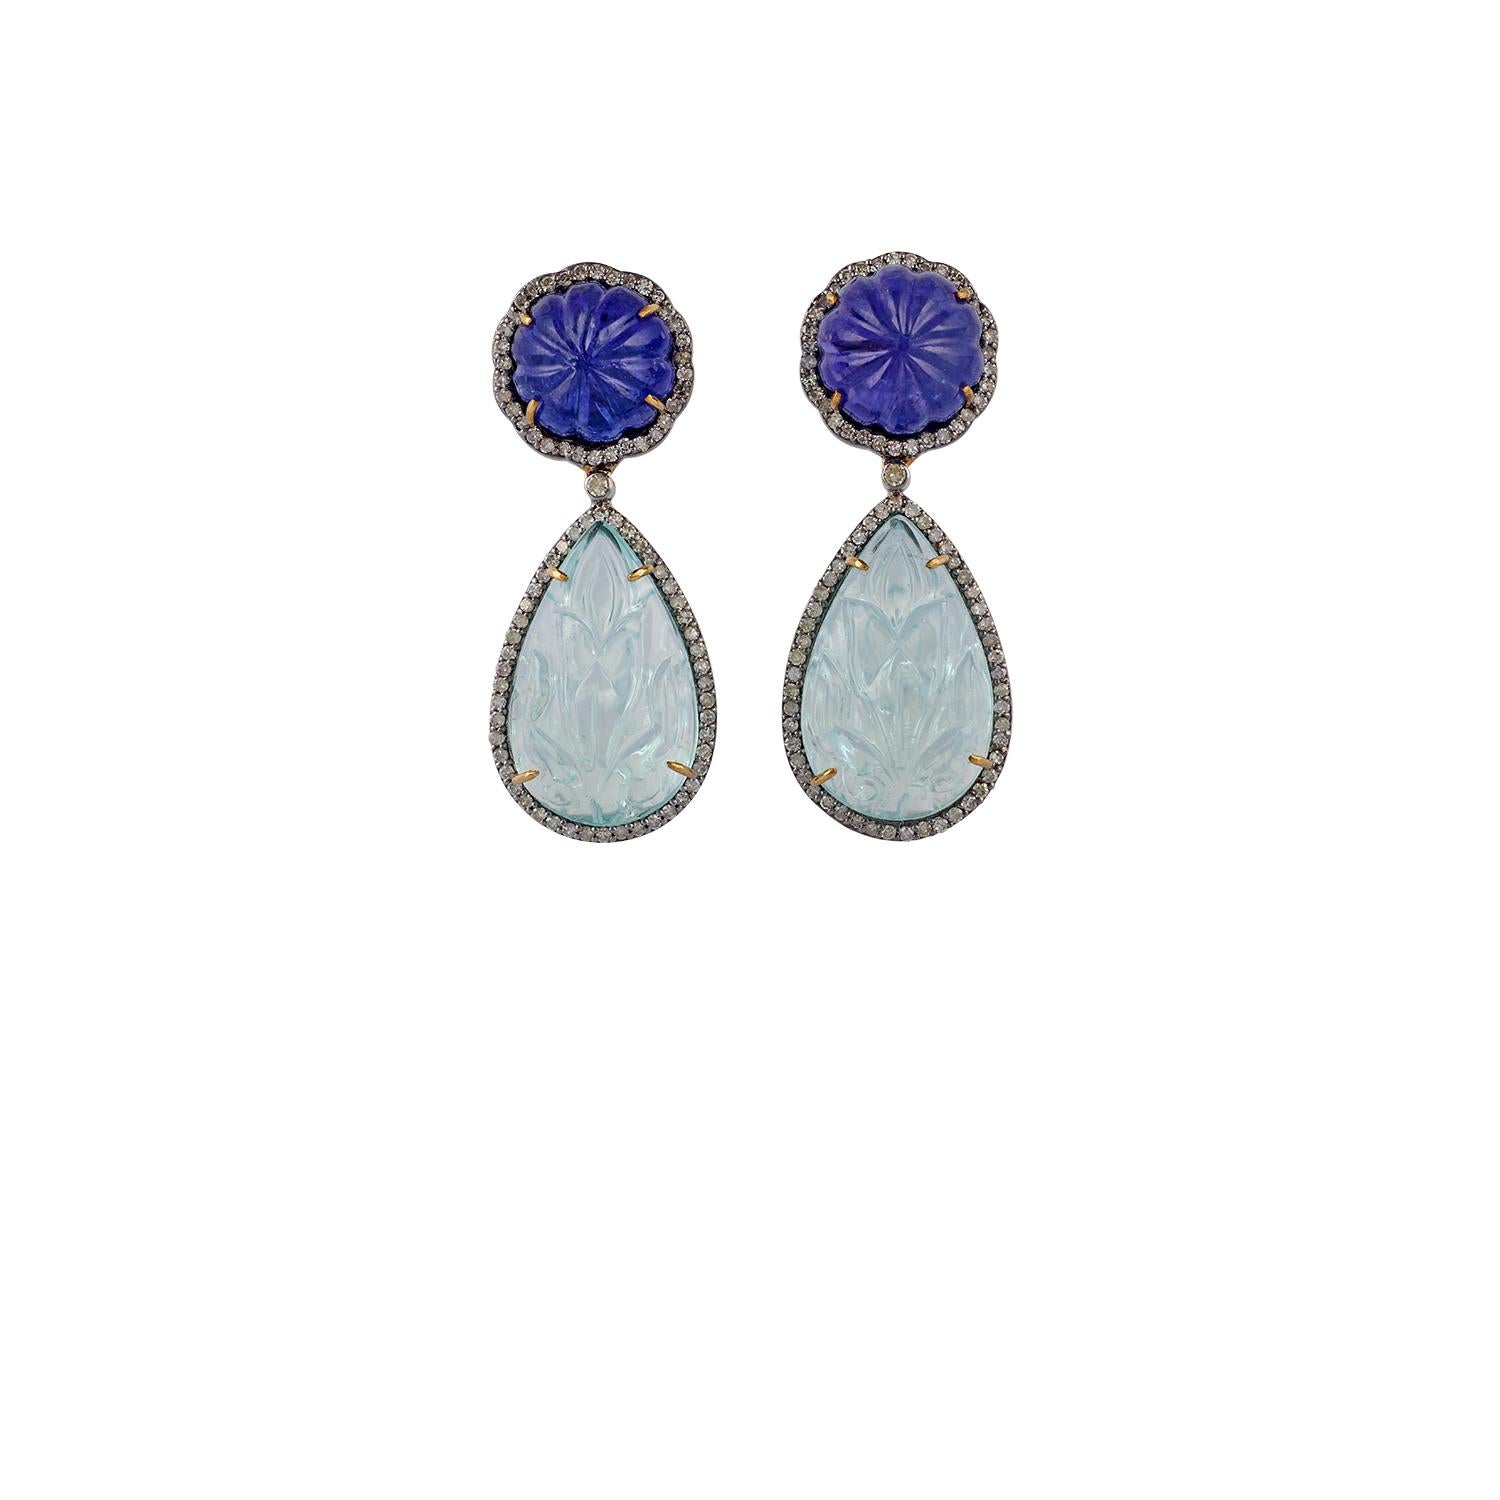 These are an elegant pair of earrings in a victorian style that features 26.30 carats of carved aquamarine, 19.79 carats of carved tanzanite & 1.18 carats of diamonds, the earrings are studded in gold & silver weight 1.59 grams of gold & 4.05 grams